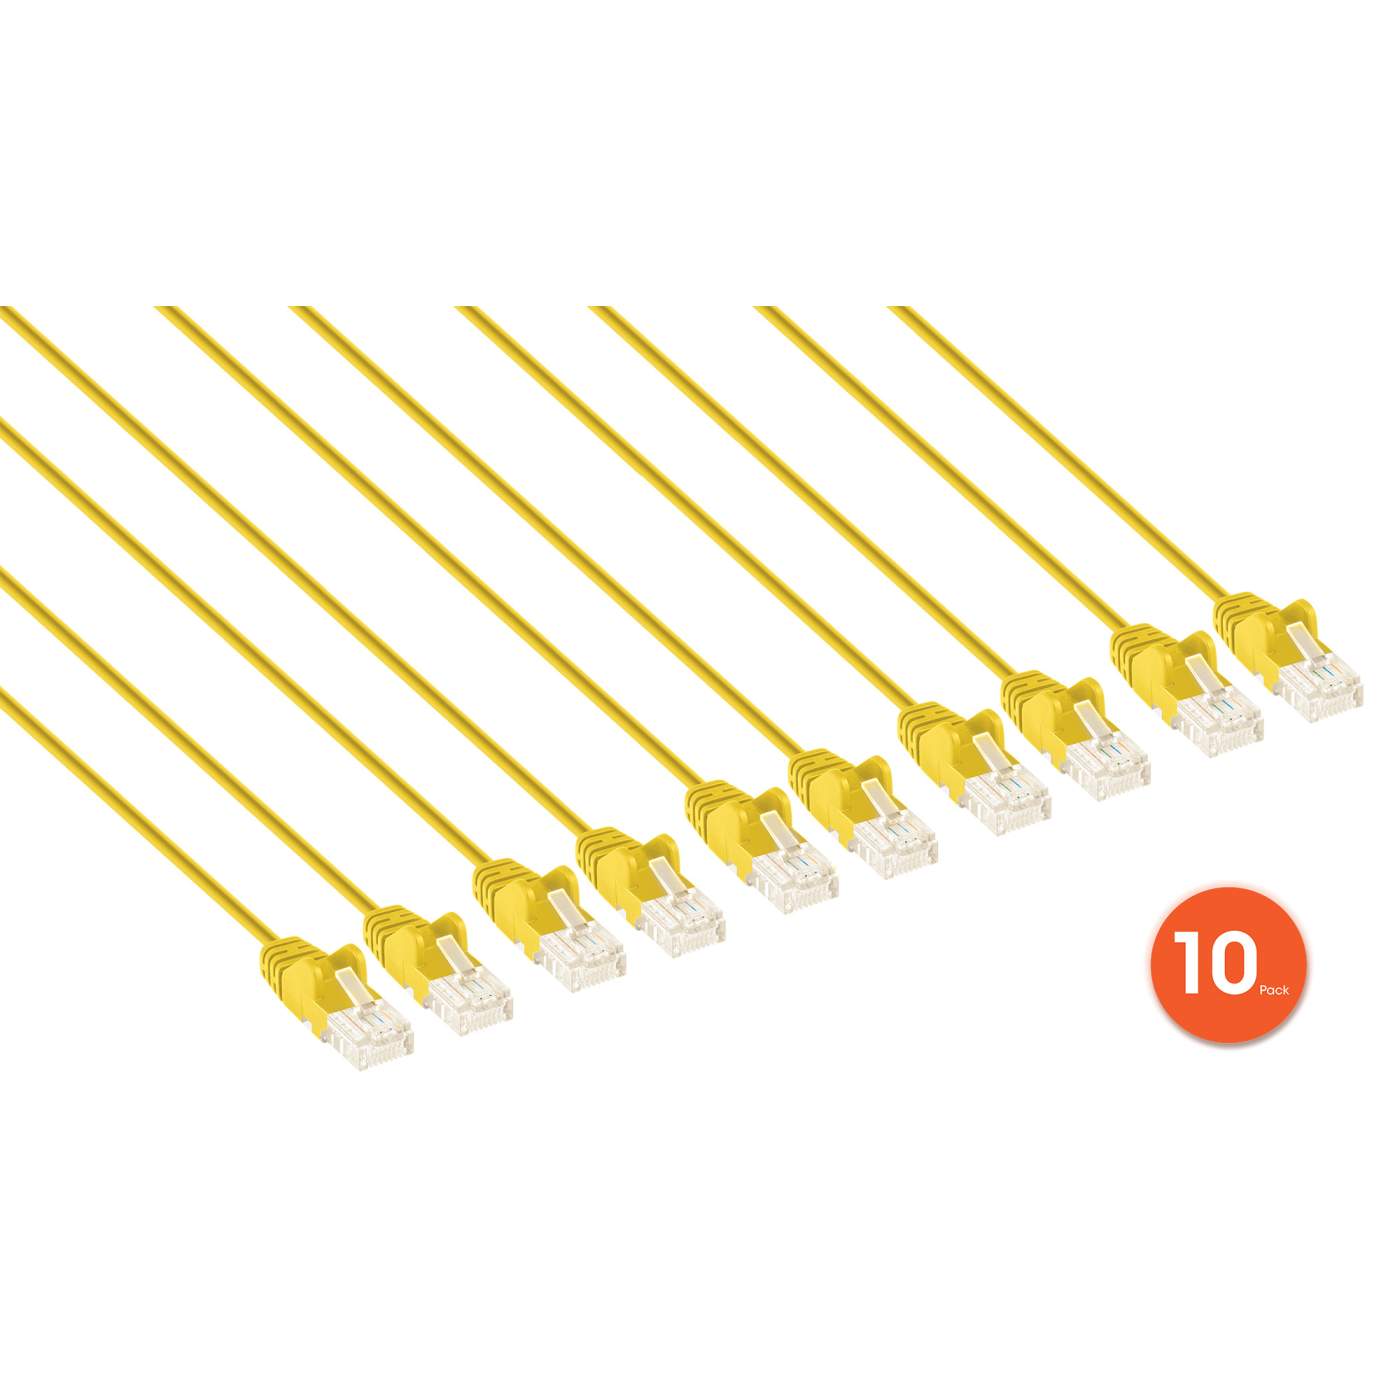 Cat6 U/UTP Slim Network Patch Cable, 10 ft., Yellow, 10-Pack Image 2